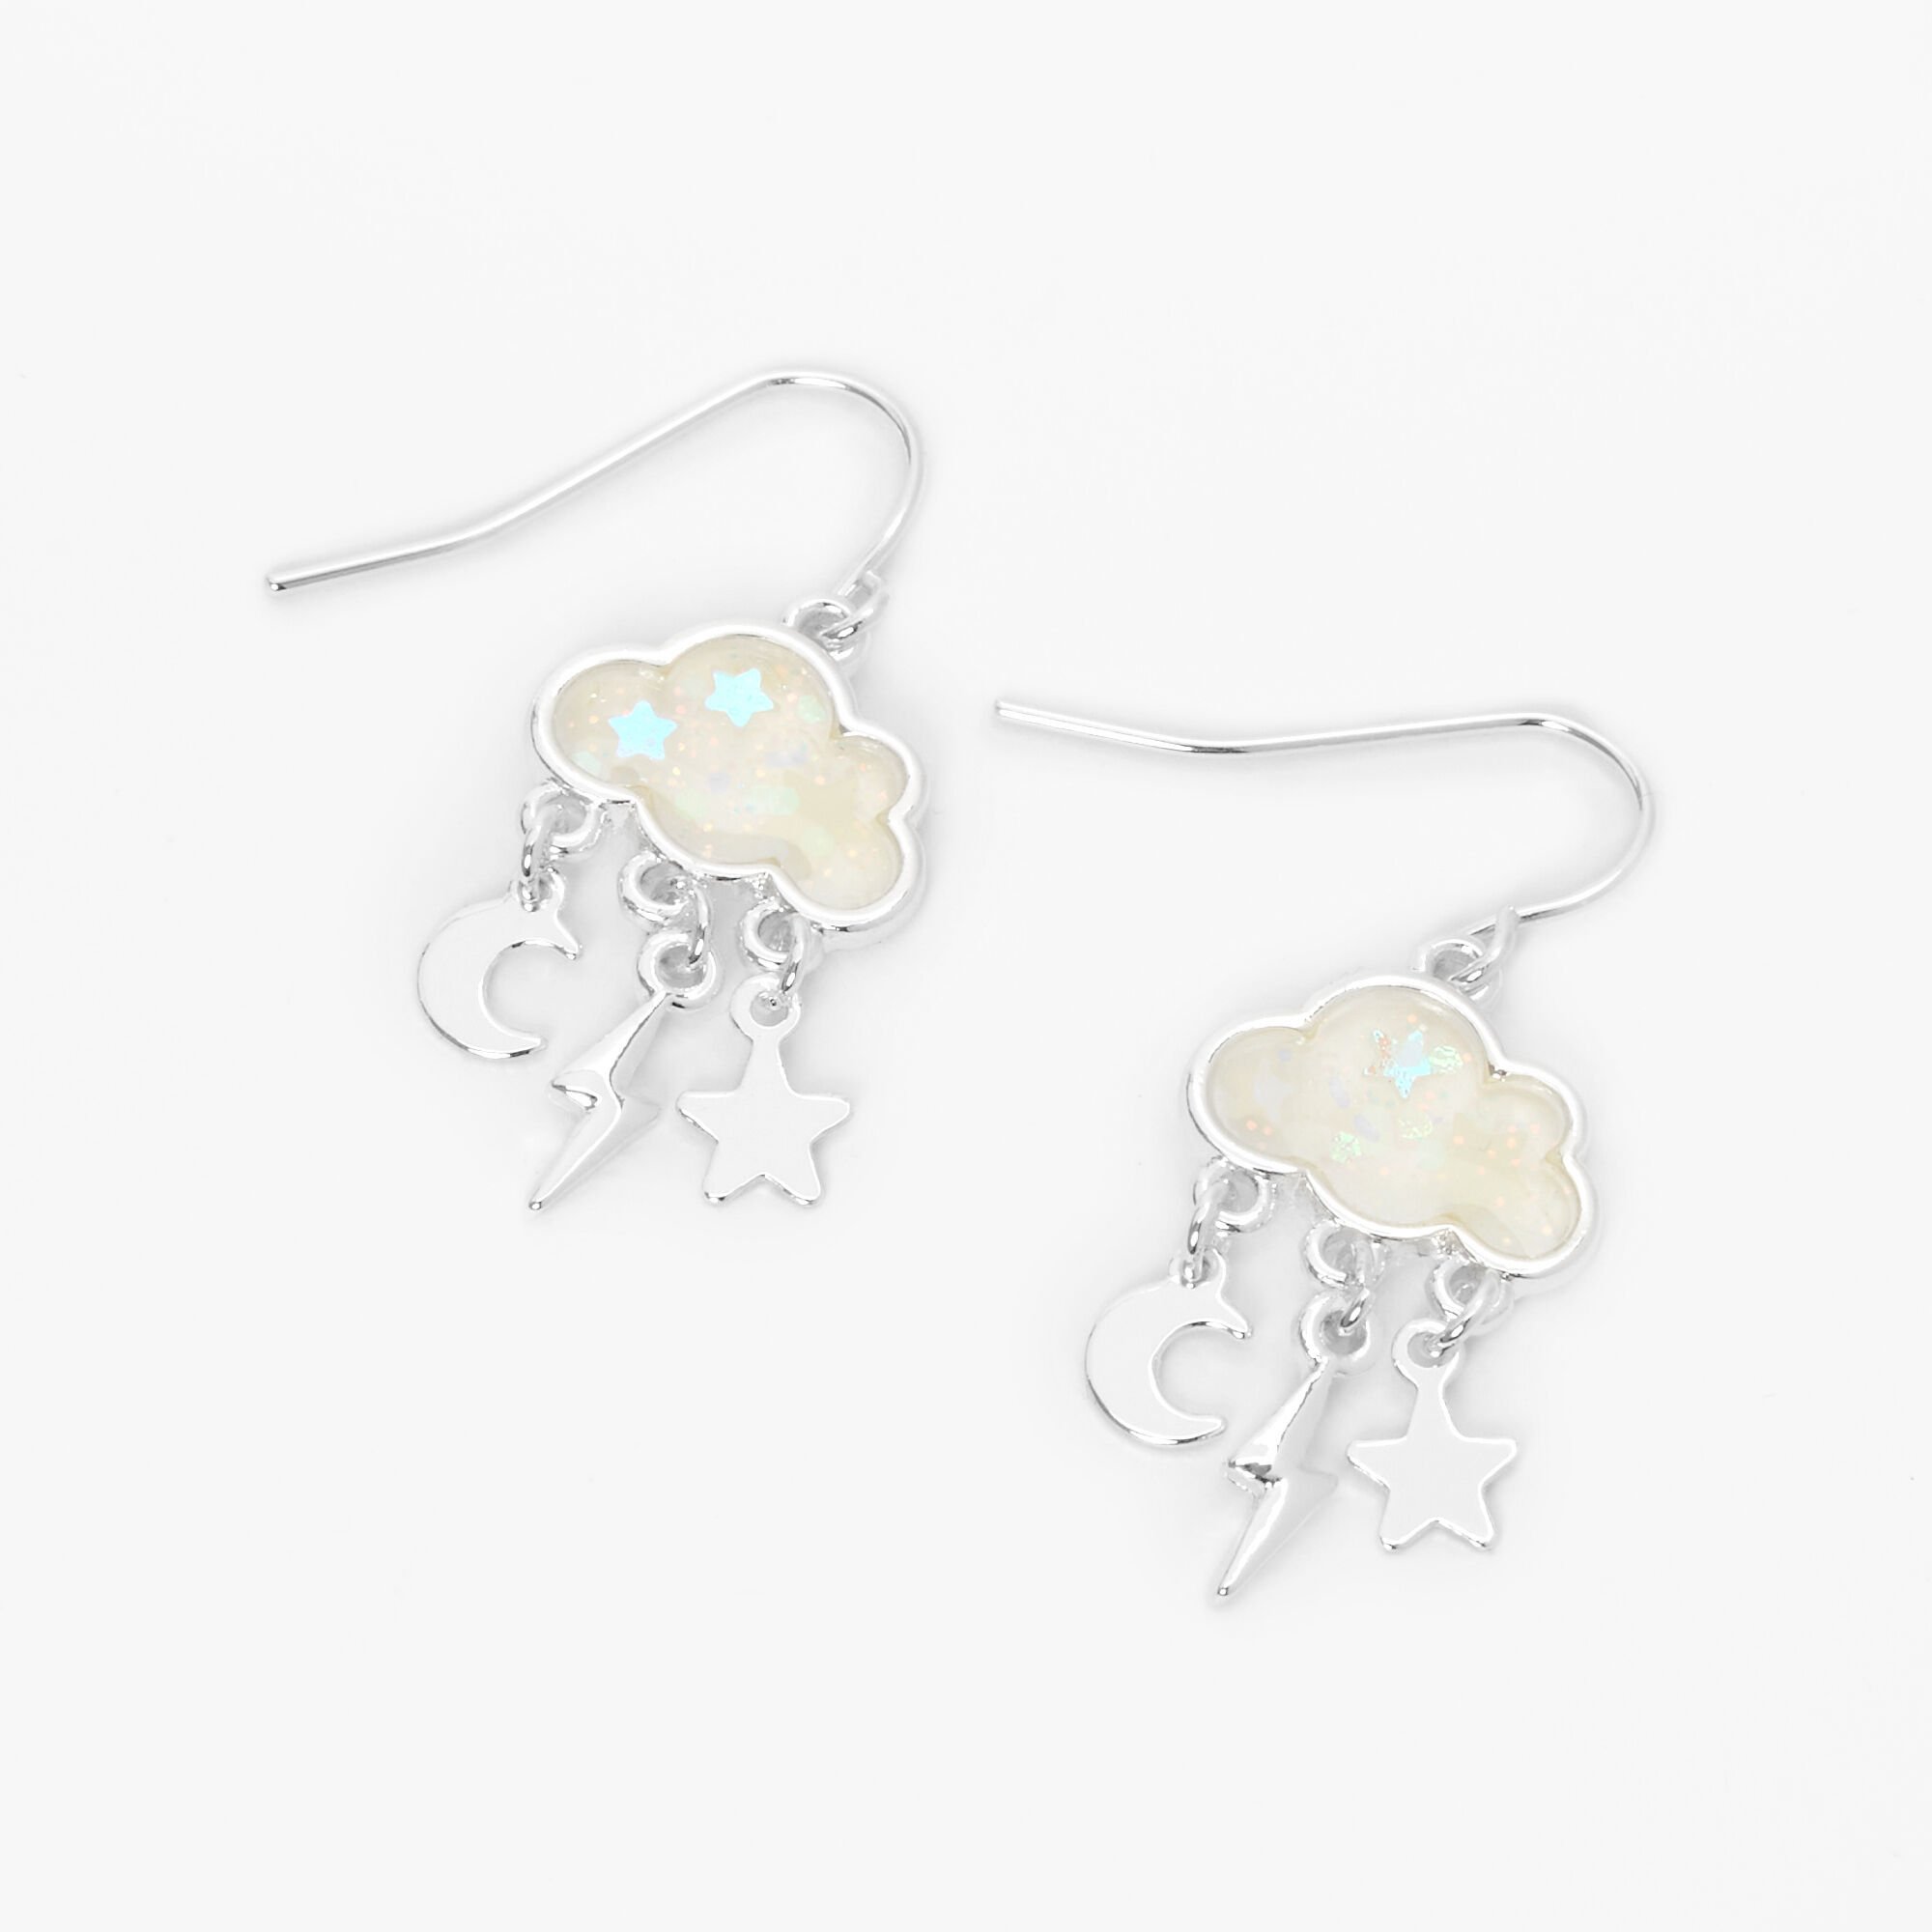 View Claires Tone 05 Glow In The Dark Cloud Drop Earrings Silver information